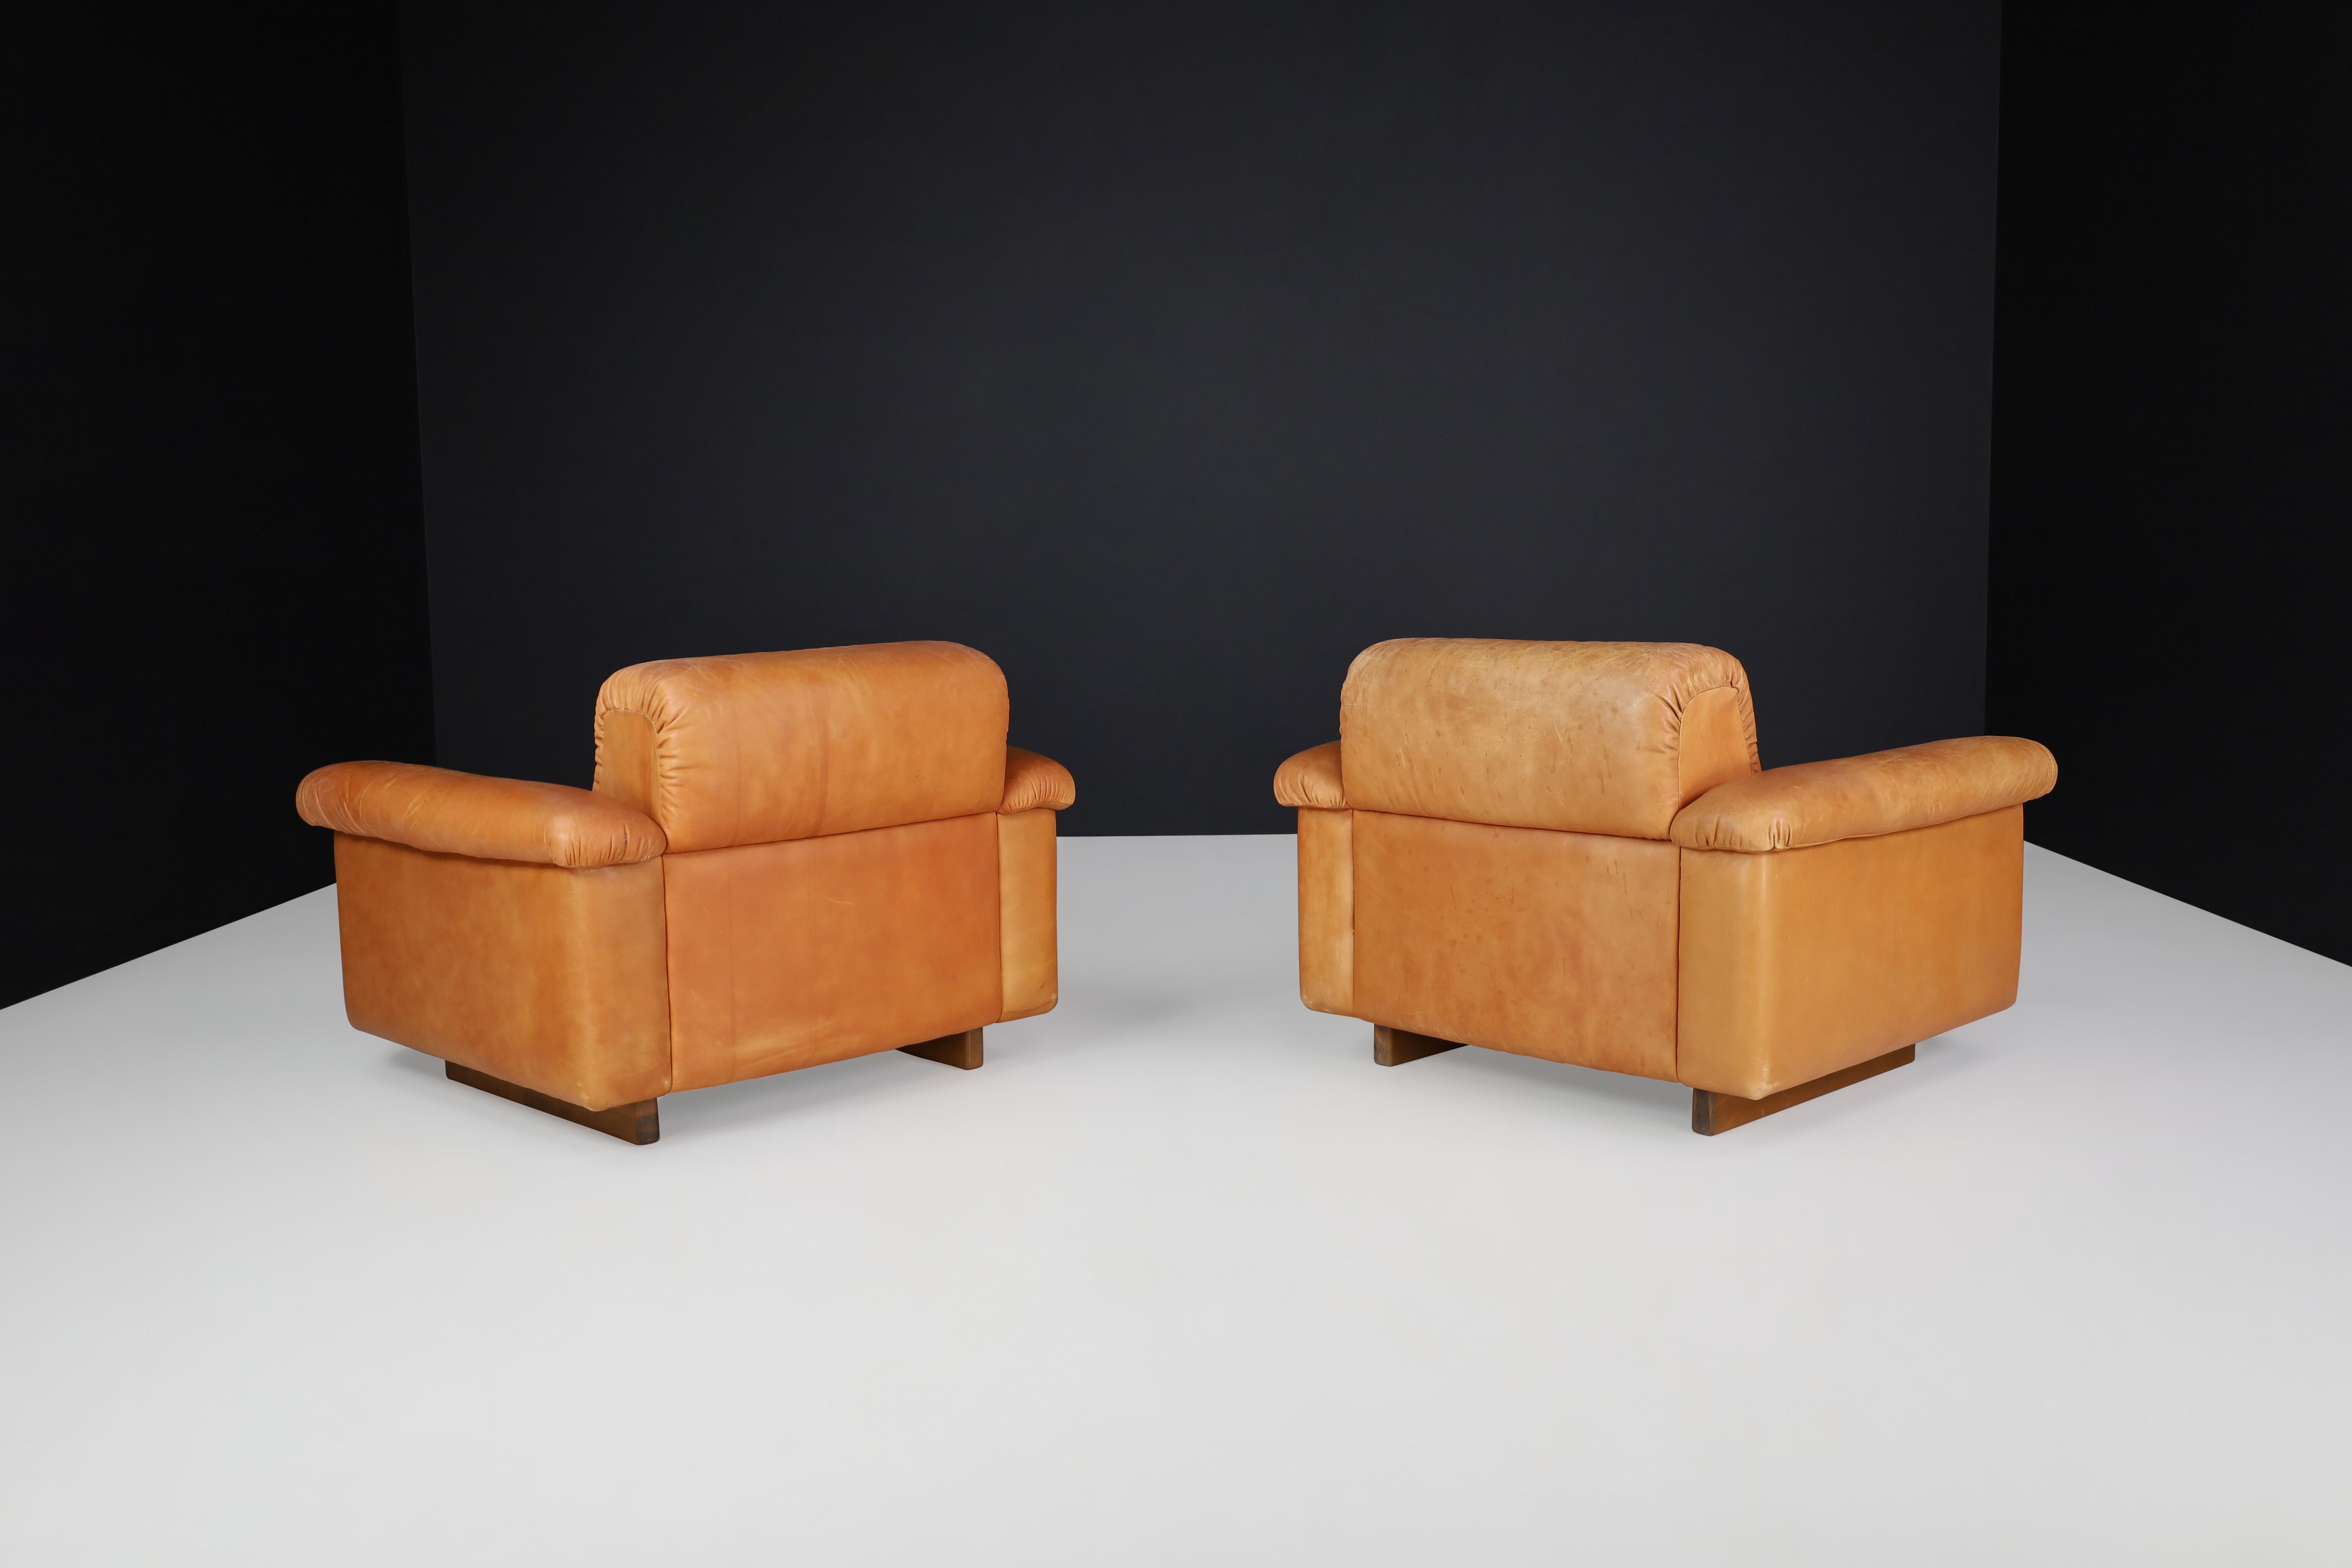 De Sede DS 45 Lounge Chairs in Patinated Leather, Switzerland, 1970s For Sale 6